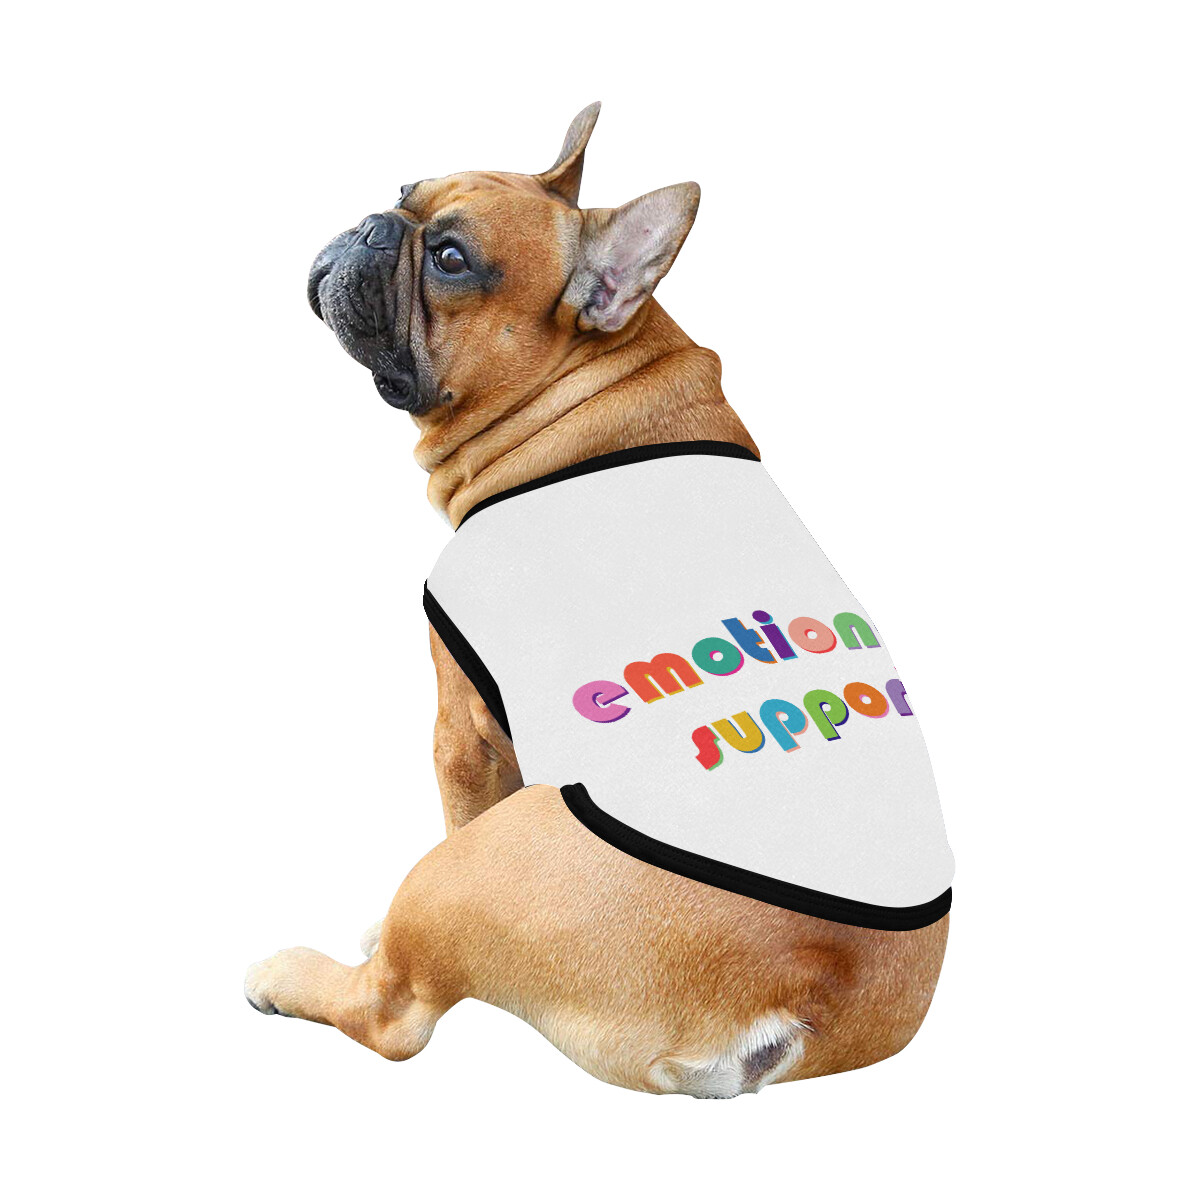 🐕 Emotional support Dog shirt, Dog Tank Top, Dog t-shirt, Dog clothes, Gifts, front back print, 7 sizes XS to 3XL, dog gifts, white